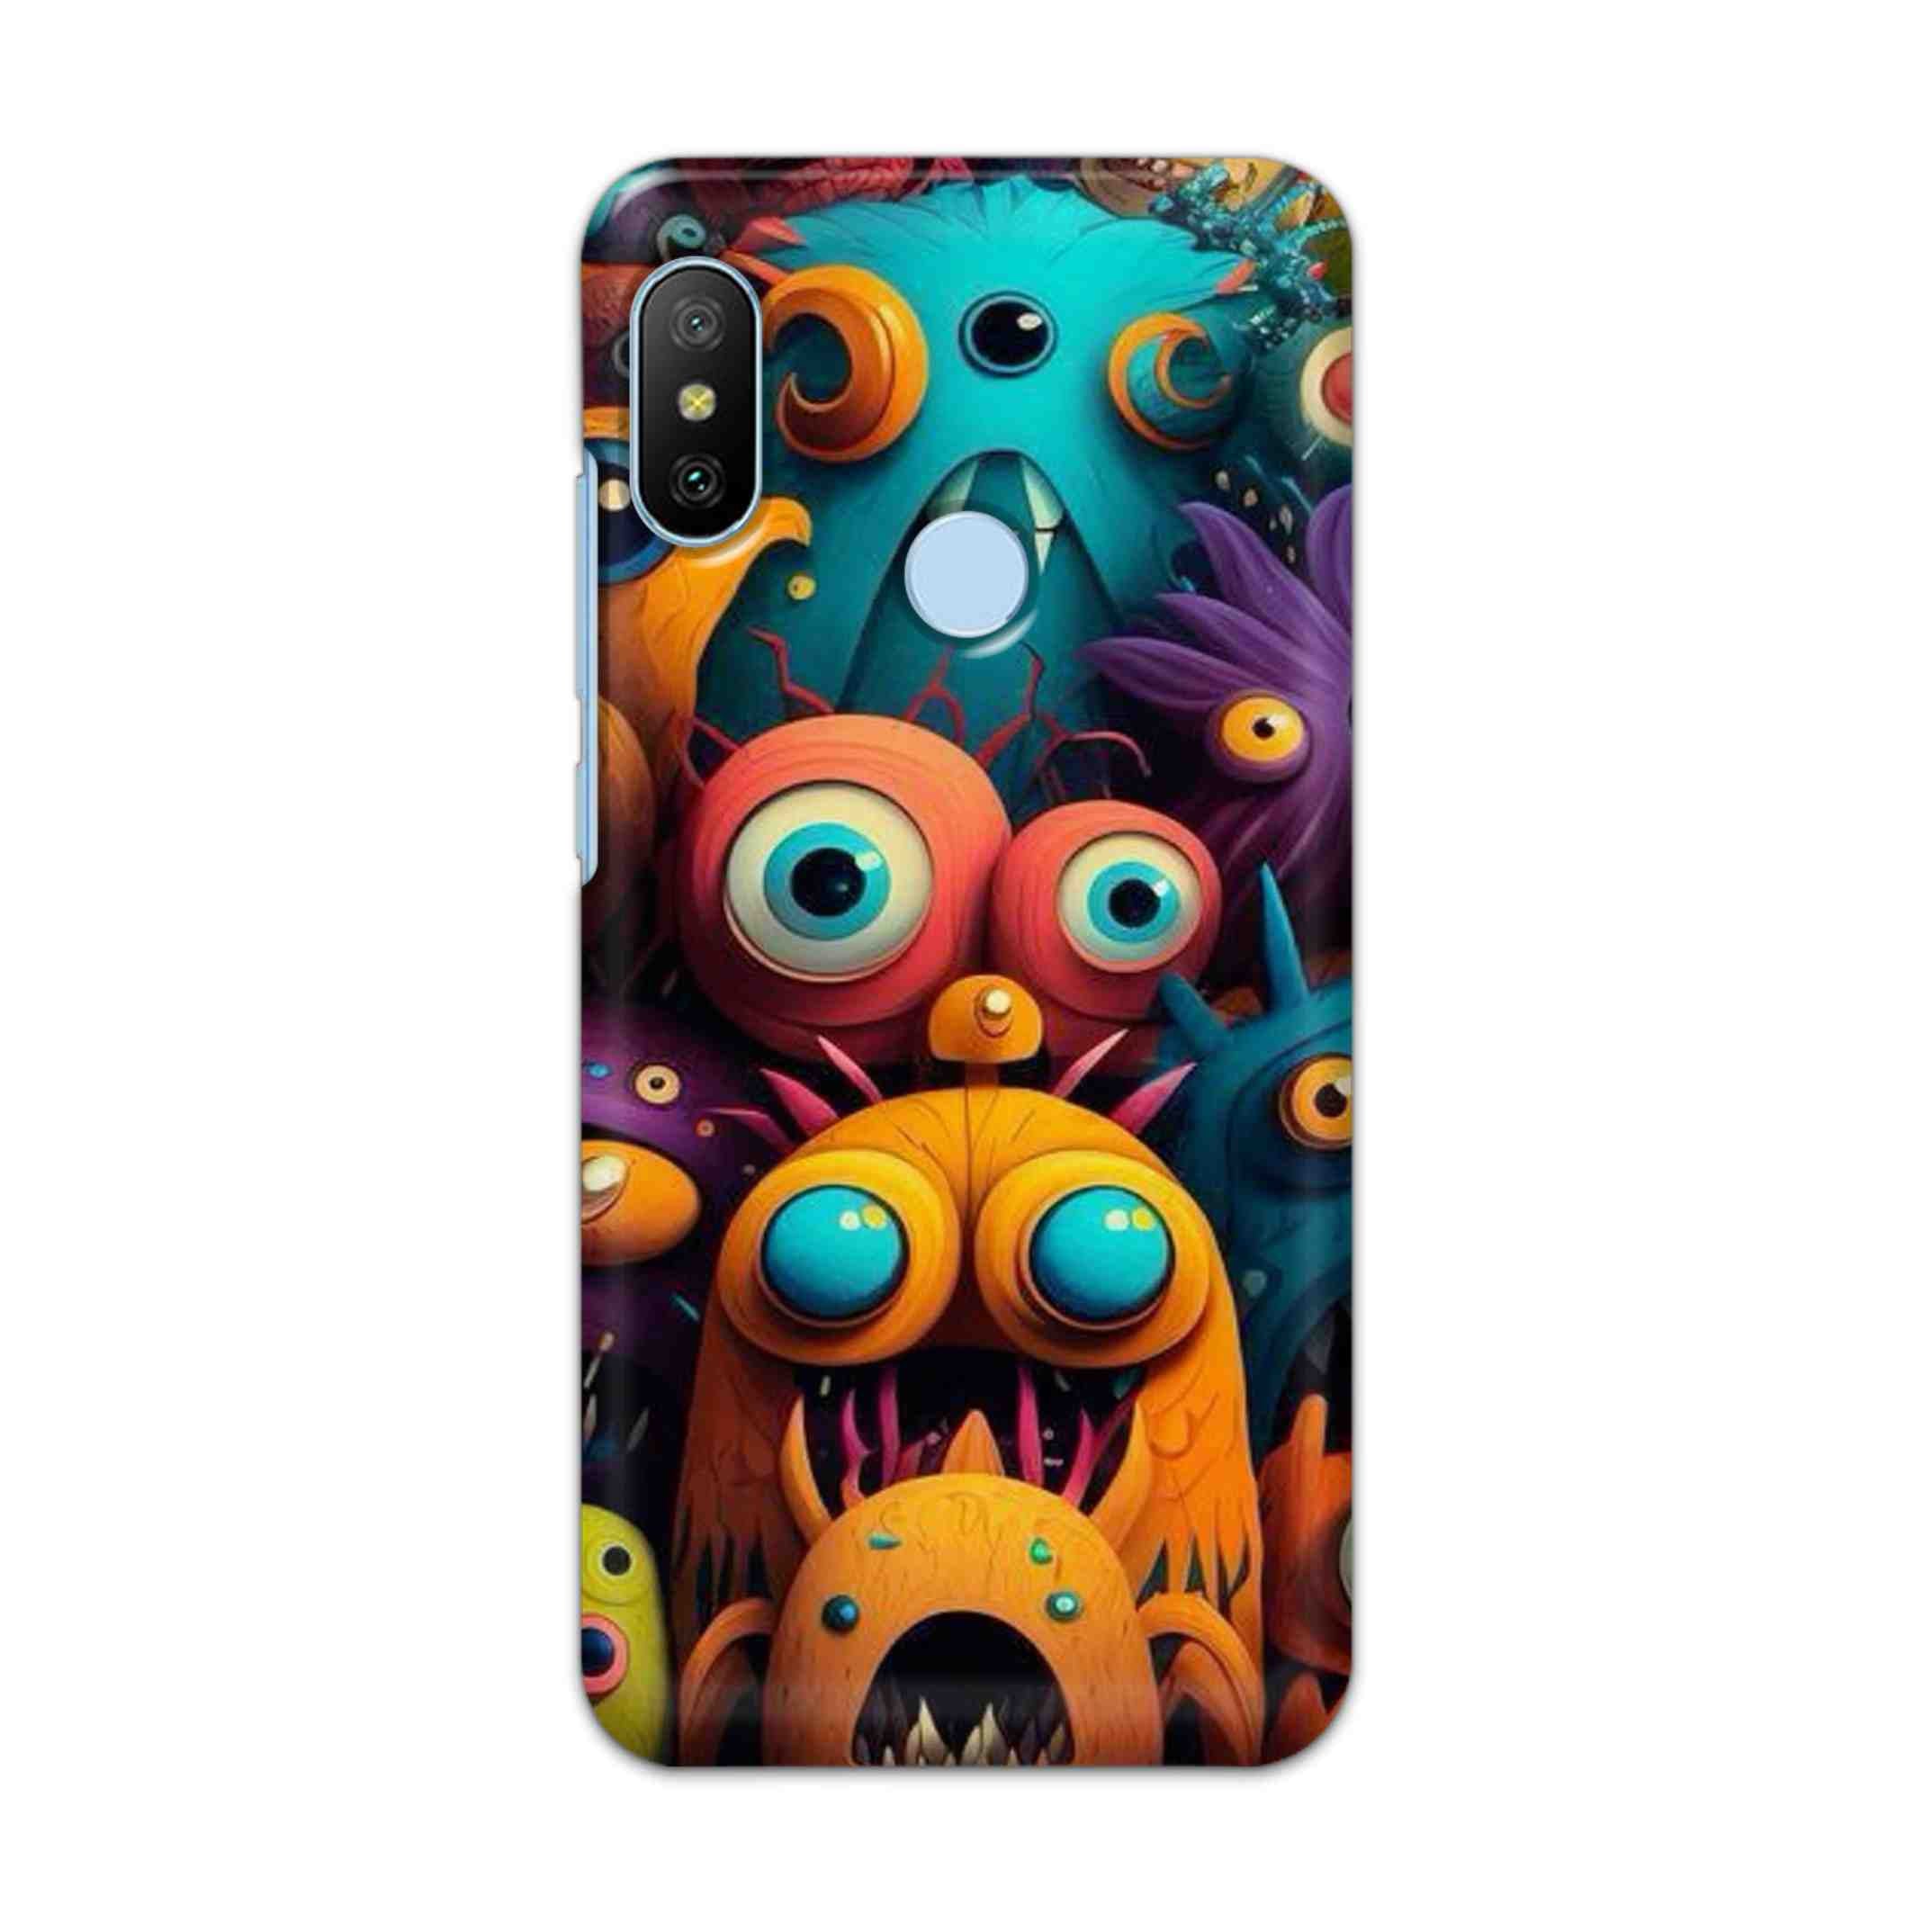 Buy Zombie Hard Back Mobile Phone Case/Cover For Xiaomi Redmi 6 Pro Online